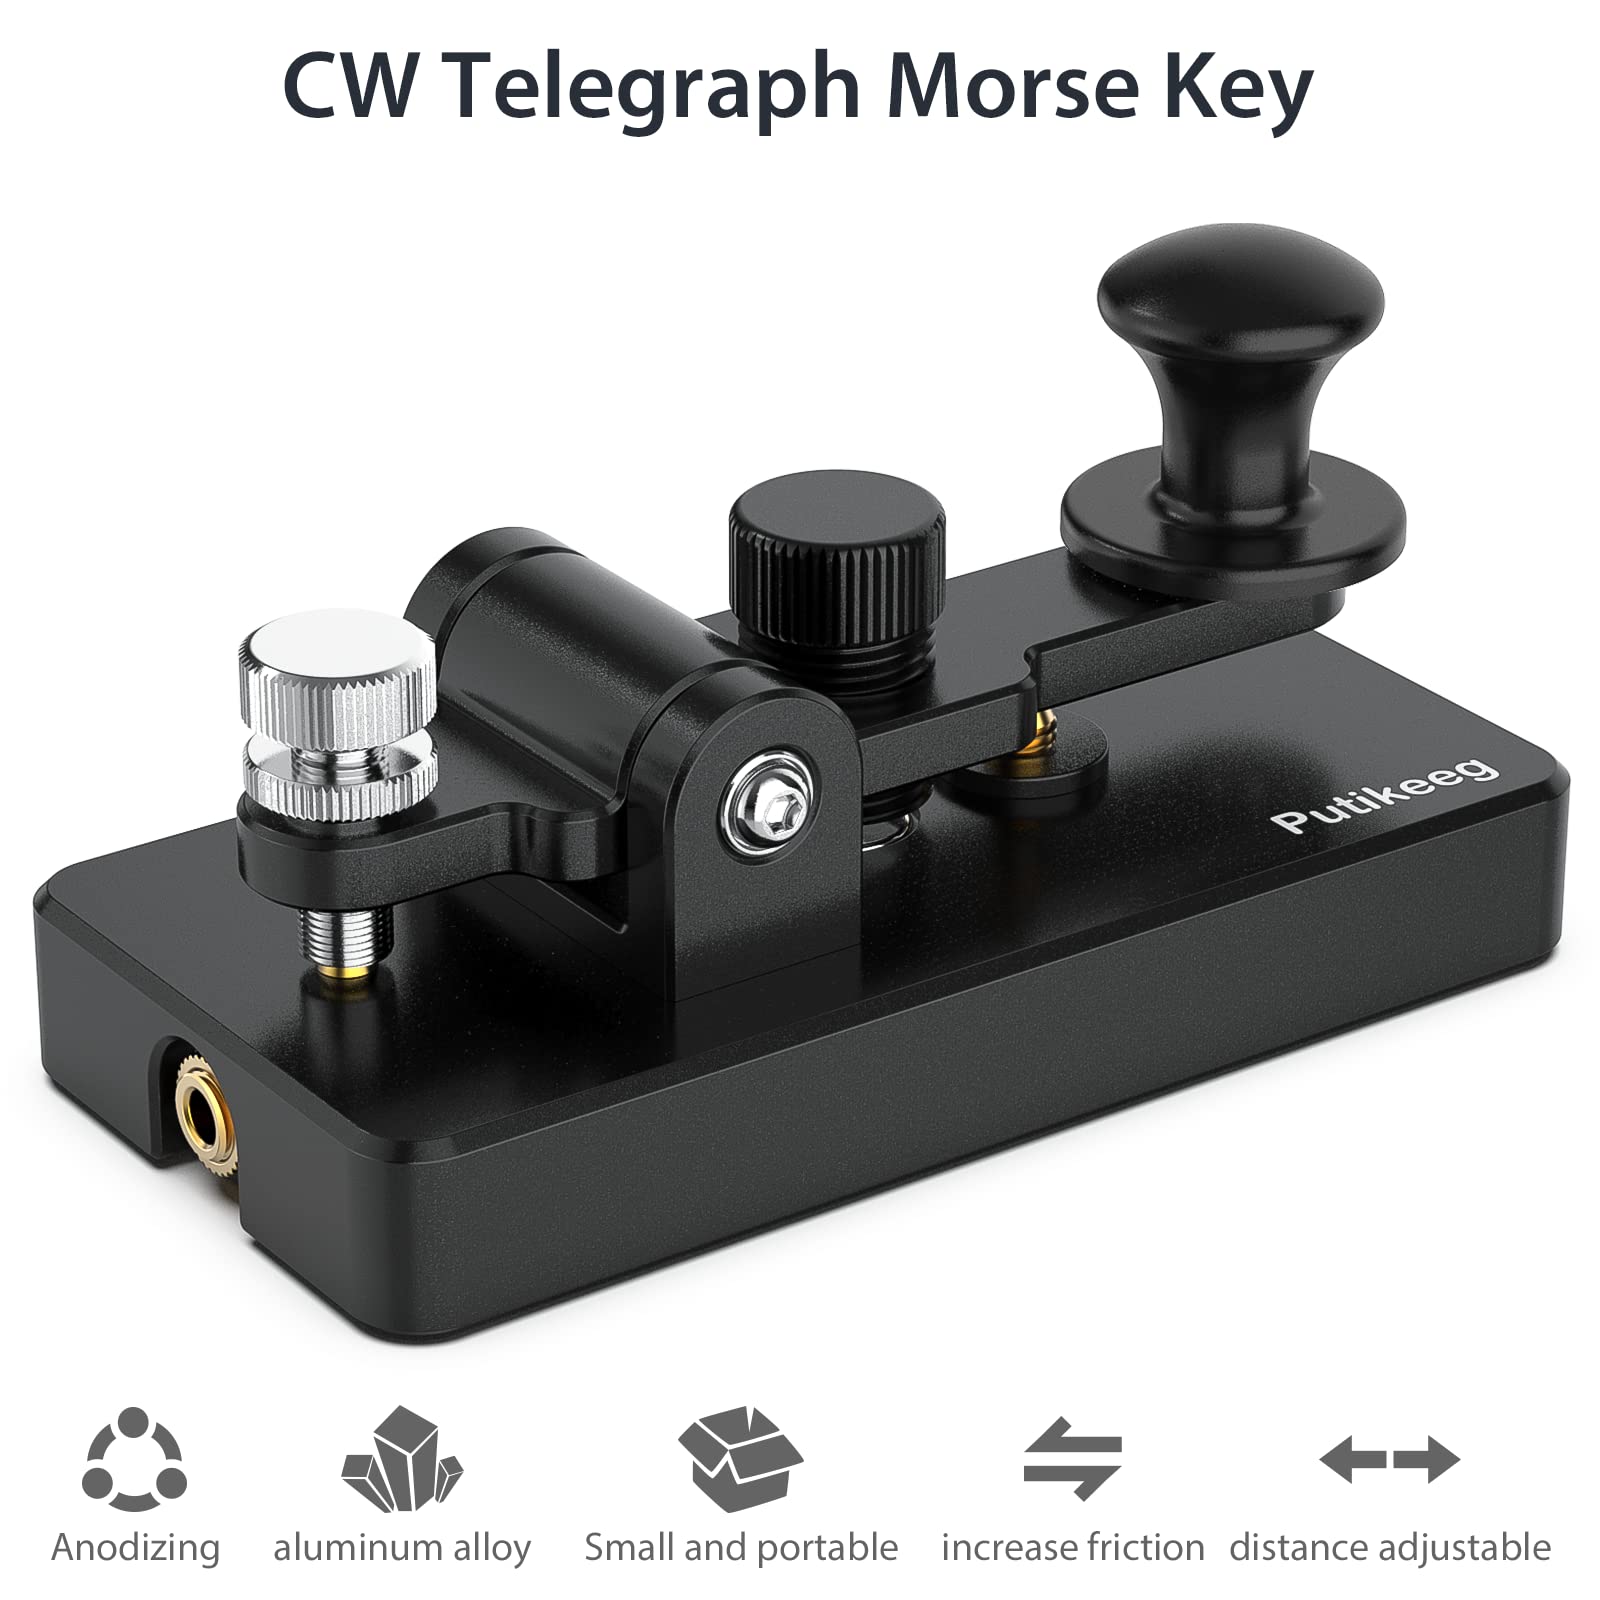 This is the a black Straight Key Morse ;Powerful magnetic return force with dual magnetic circuit. Made of high-quality 6061T6 aluminum alloy for corrosion resistance. Features NMB Japan imported bearings and stainless steel screws.